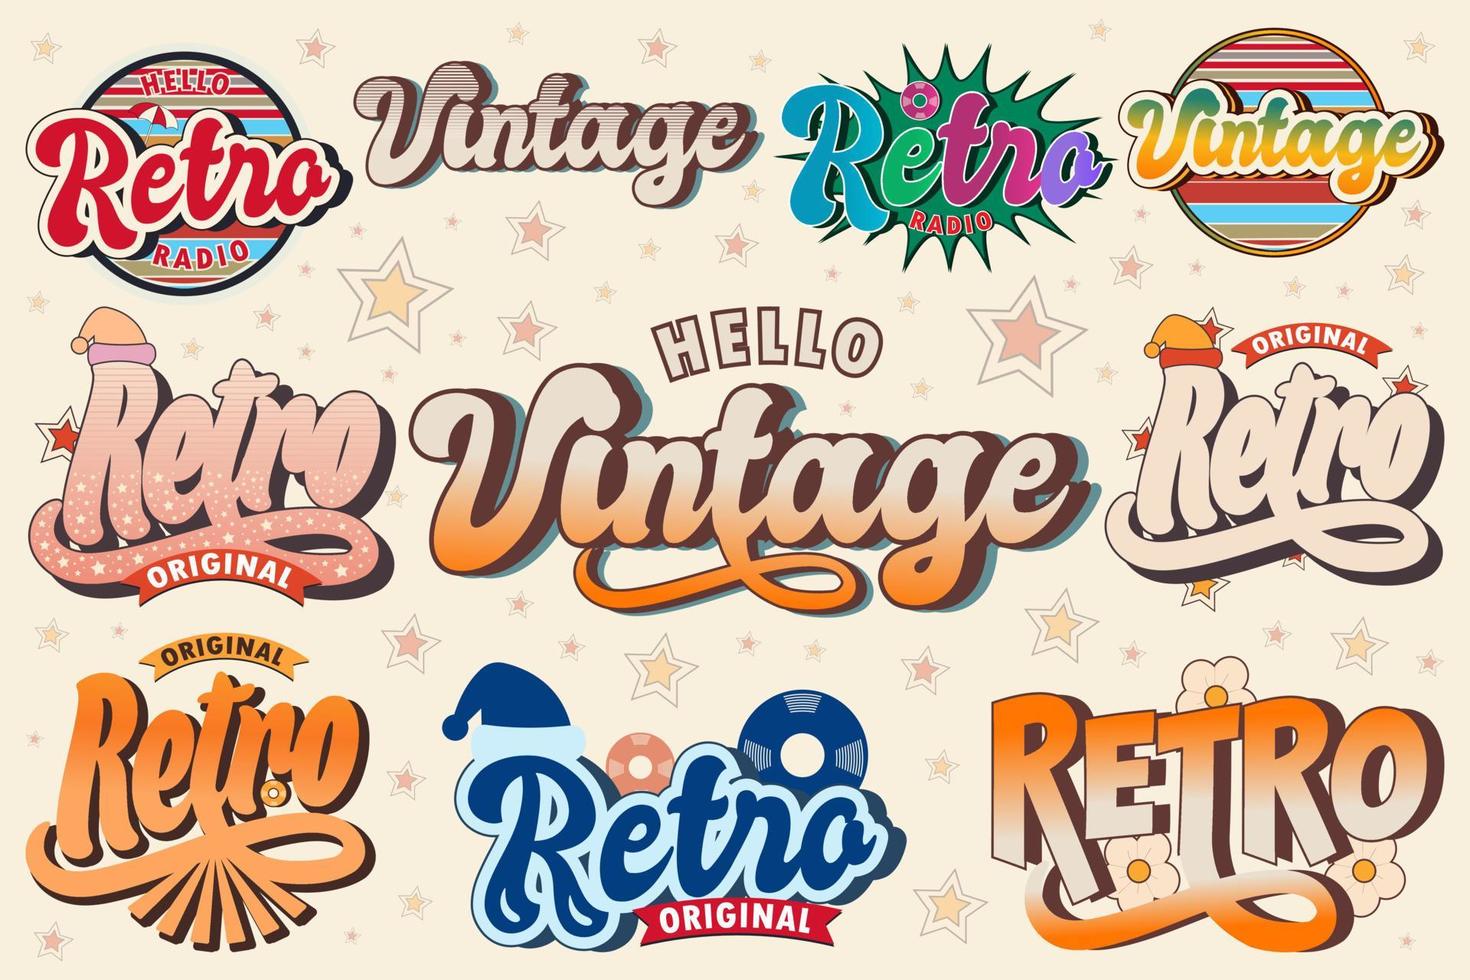 Retro original classic background, vintage, editable 70s and 80s, Retro and classic text style vector